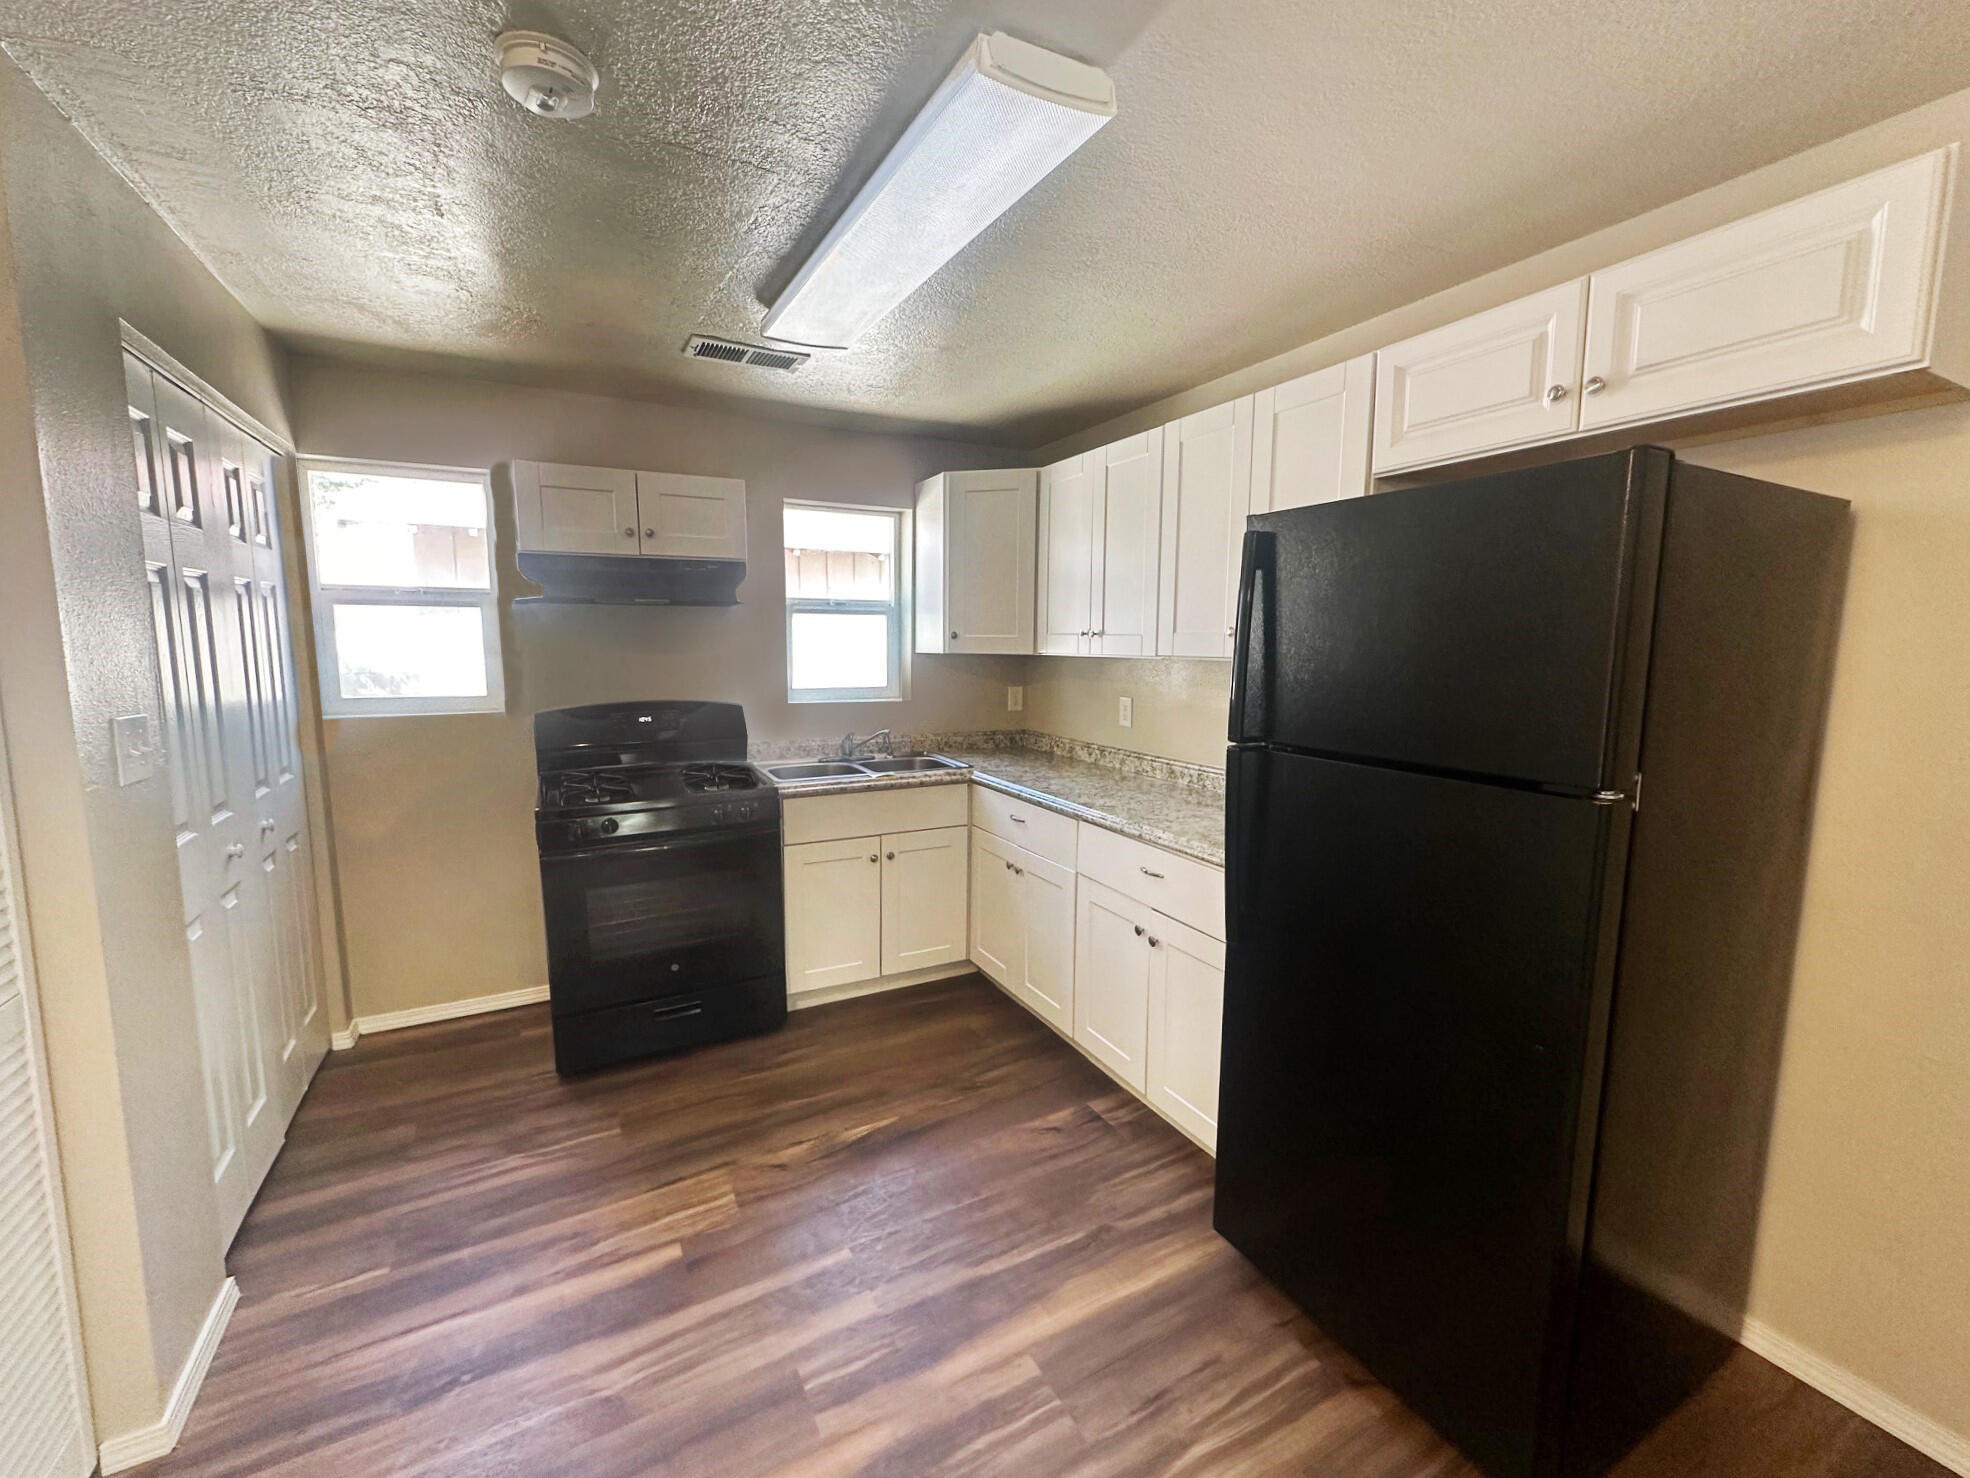 315 57th Street NW, Albuquerque, New Mexico 87105, 2 Bedrooms Bedrooms, ,1 BathroomBathrooms,Residential,For Sale,315 57th Street NW,1061261